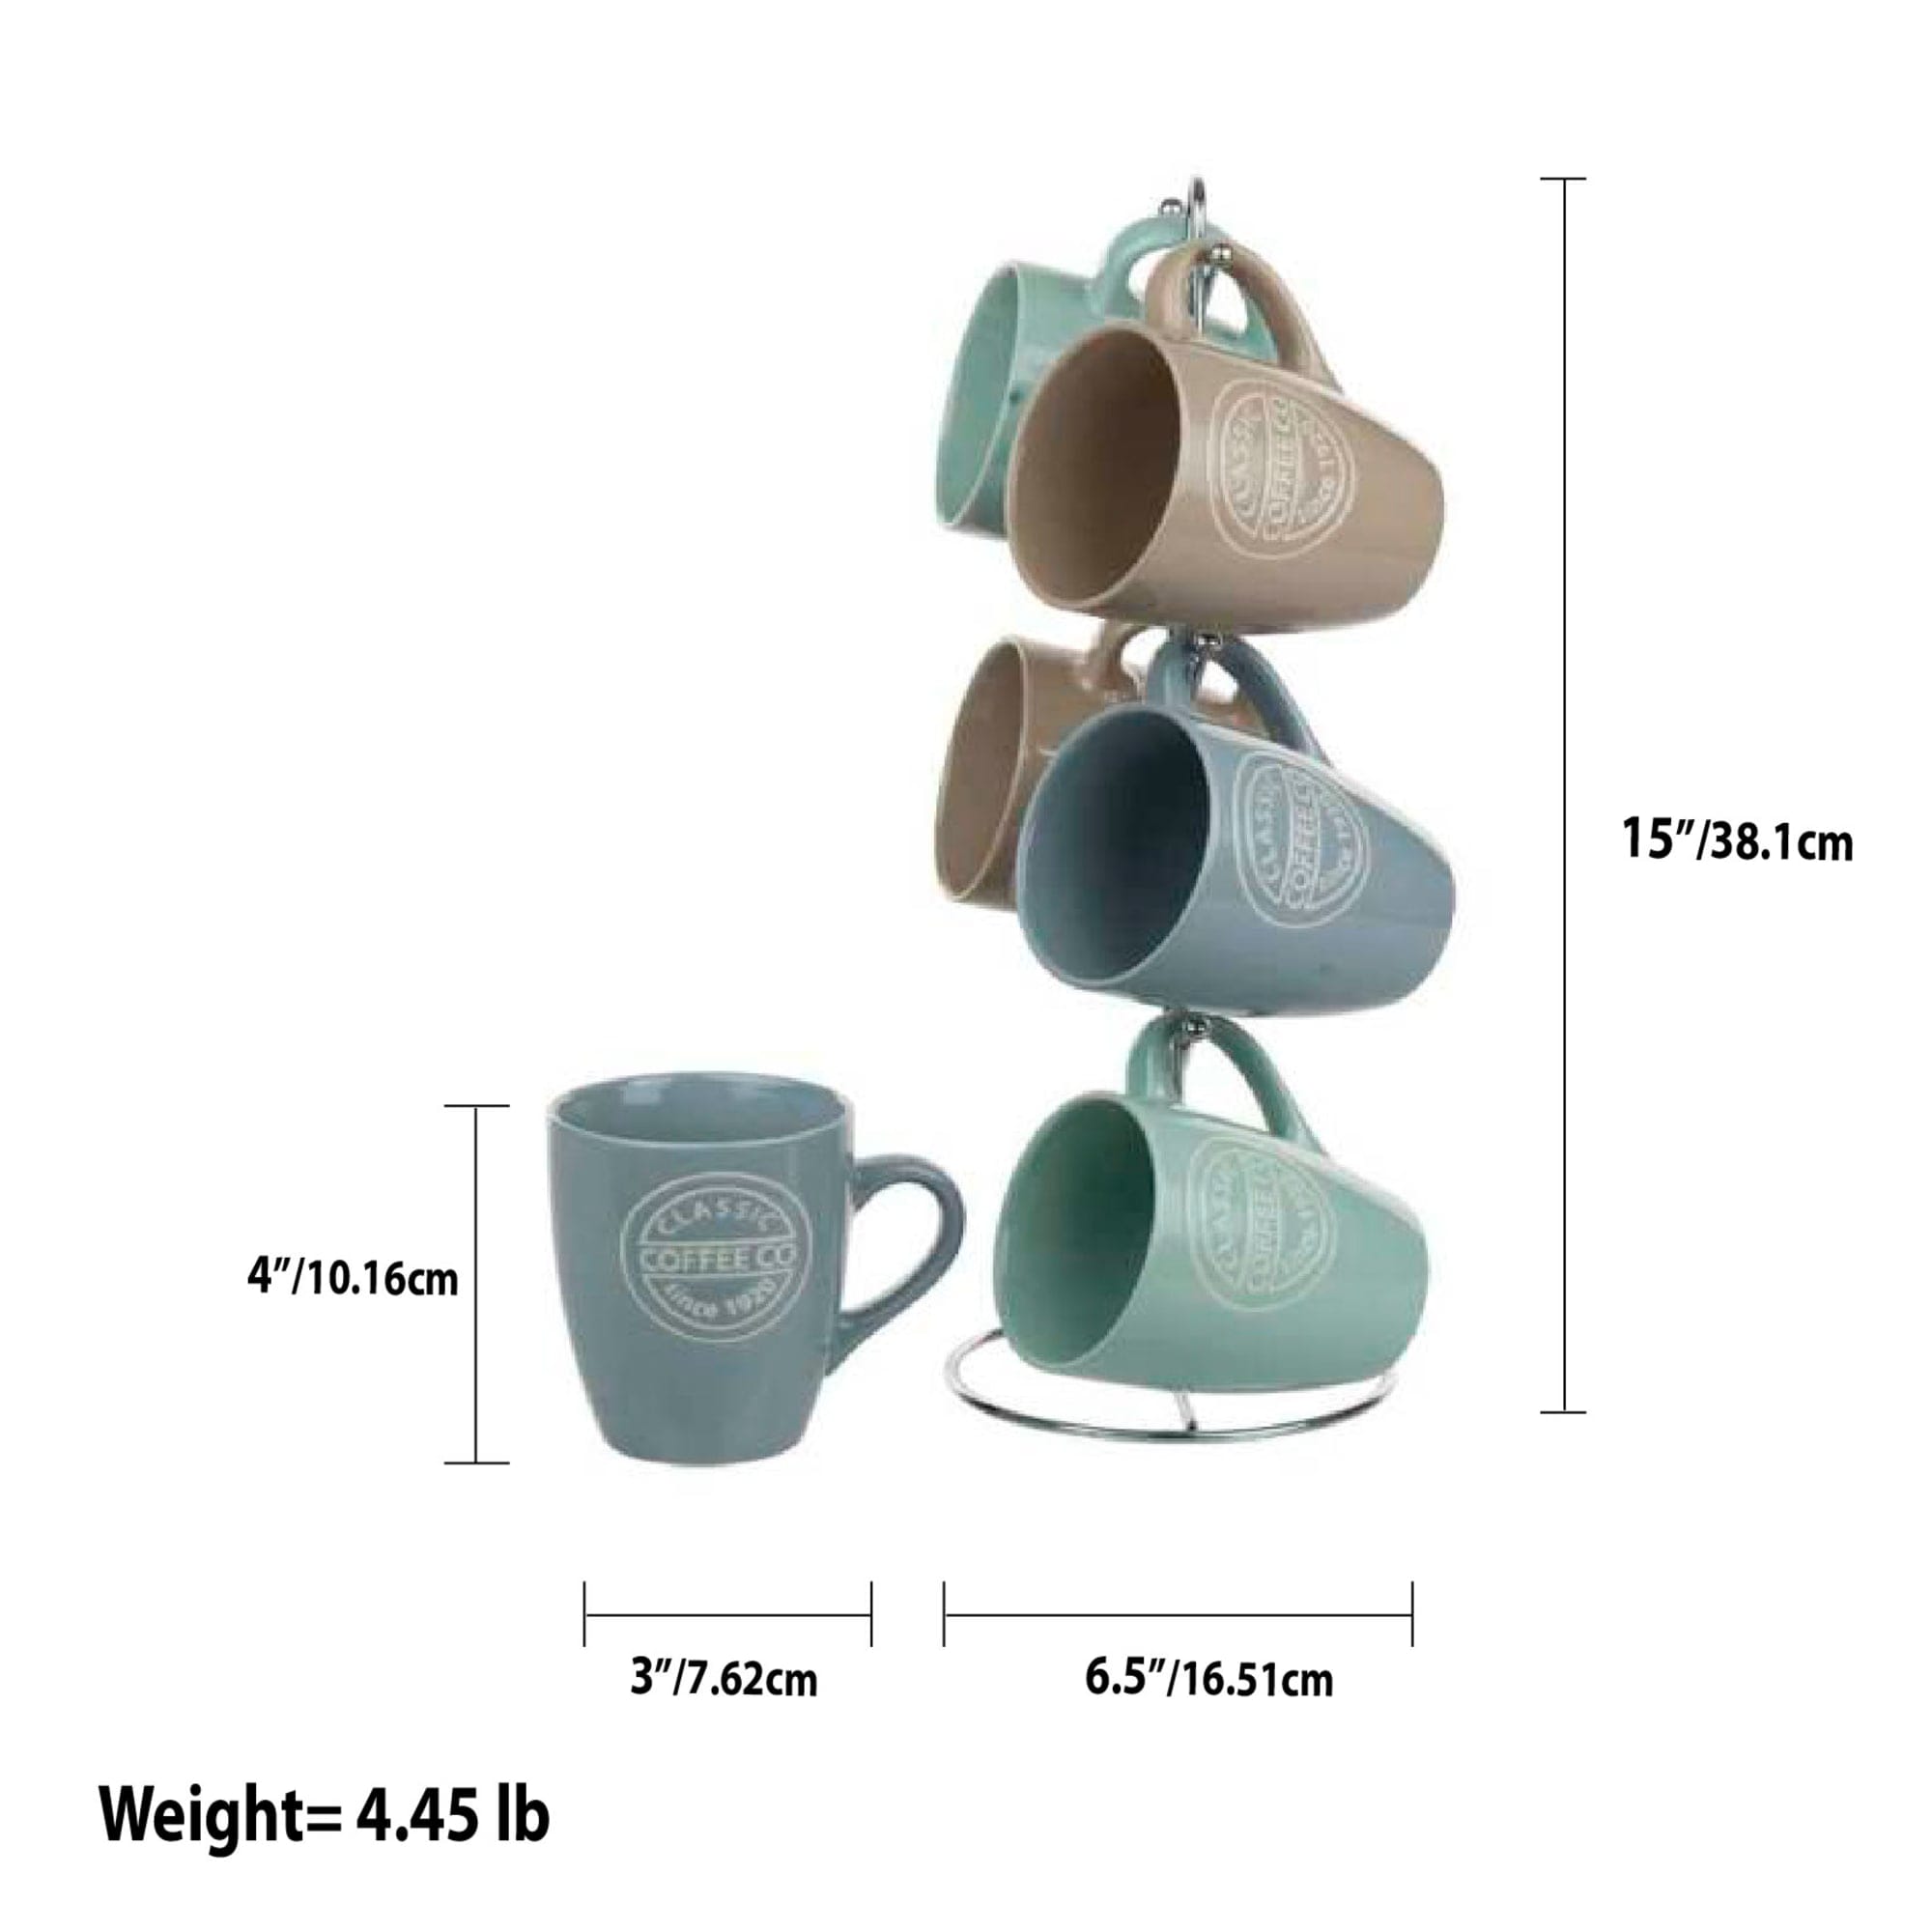 Home Basics Classic Coffee 6 Piece Mug Set with Stand $15 EACH, CASE PACK OF 6